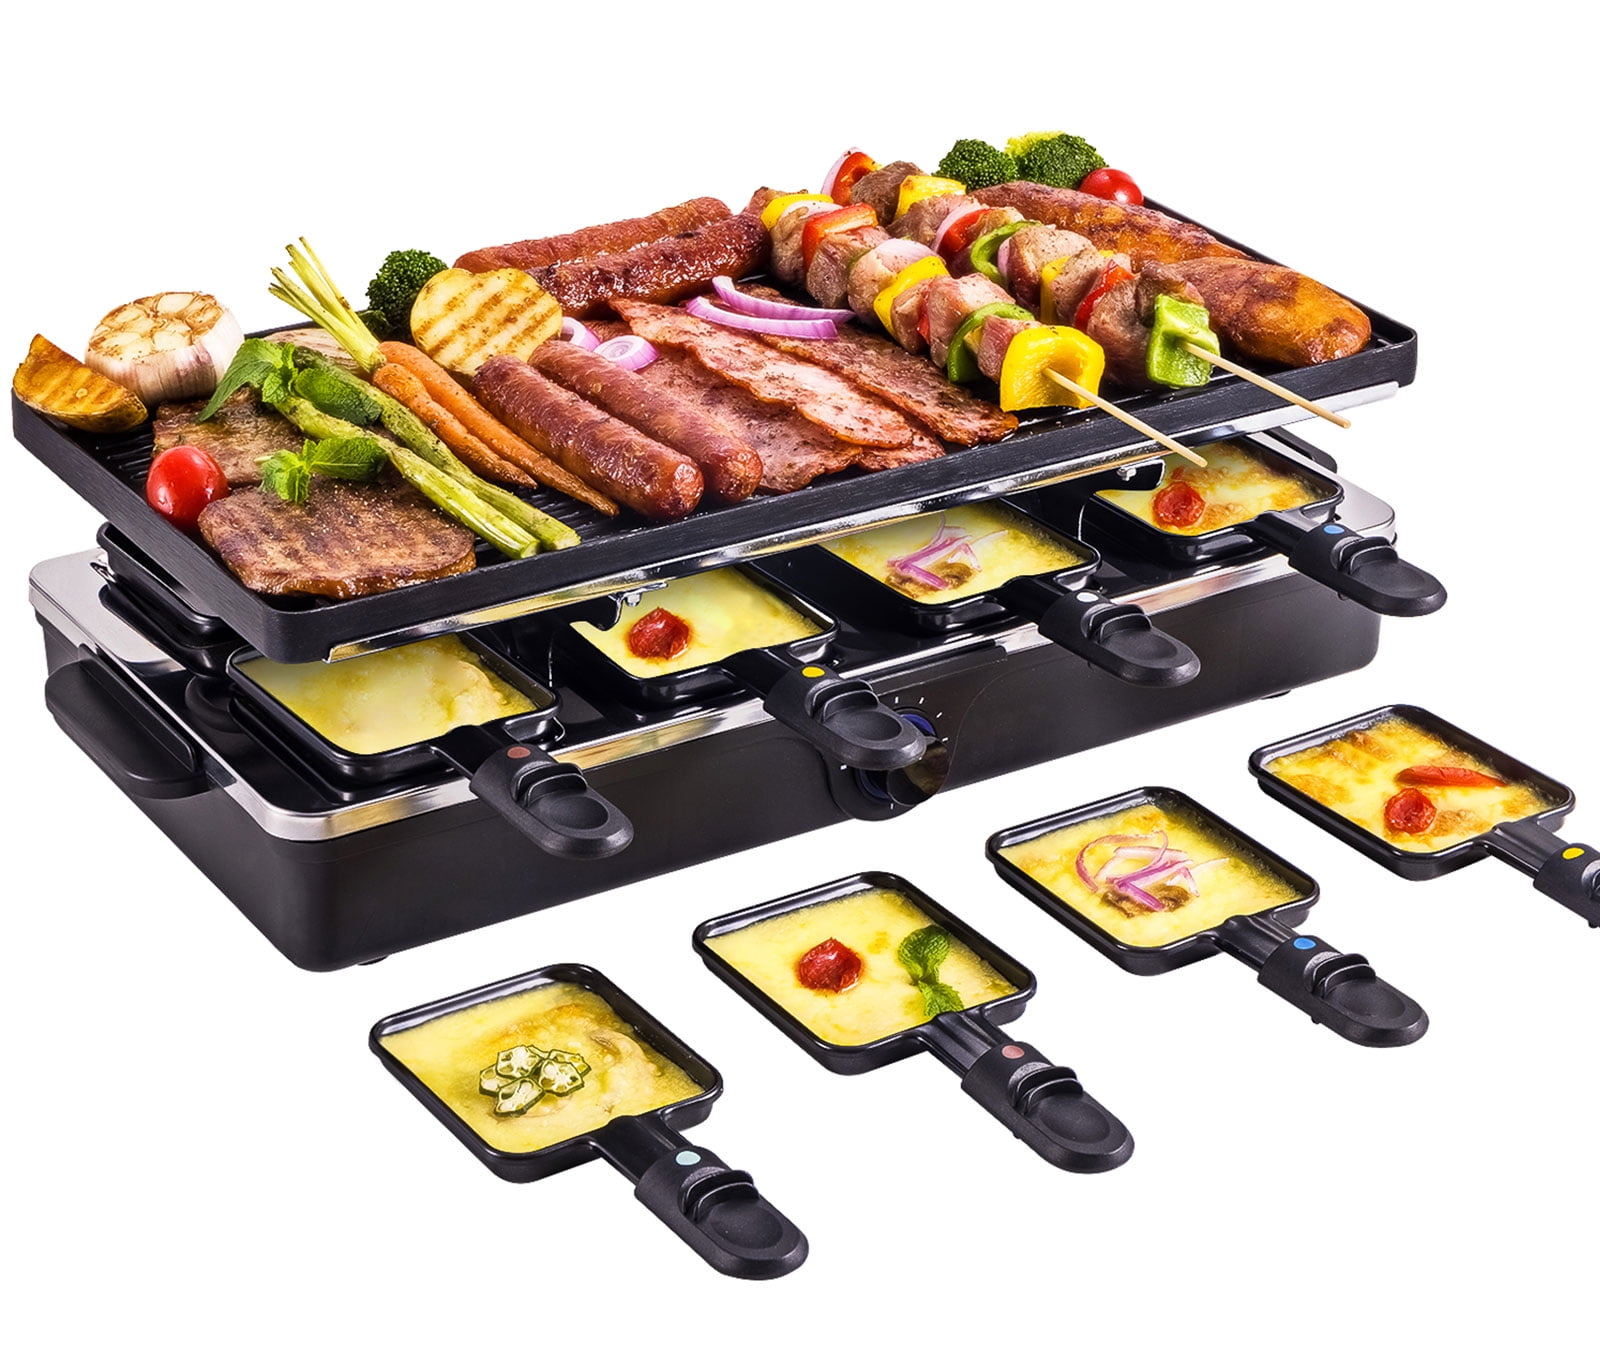  2 IN 1 Dual Raclette Grills 8-Person Baking Tray, Indoor  Electric, with Non-Stick Grilling Plat & Cooking Stone, 1300W, for Korean  BBQ- Melt Cheese, Cook Meat & Veggies at Once,Black 